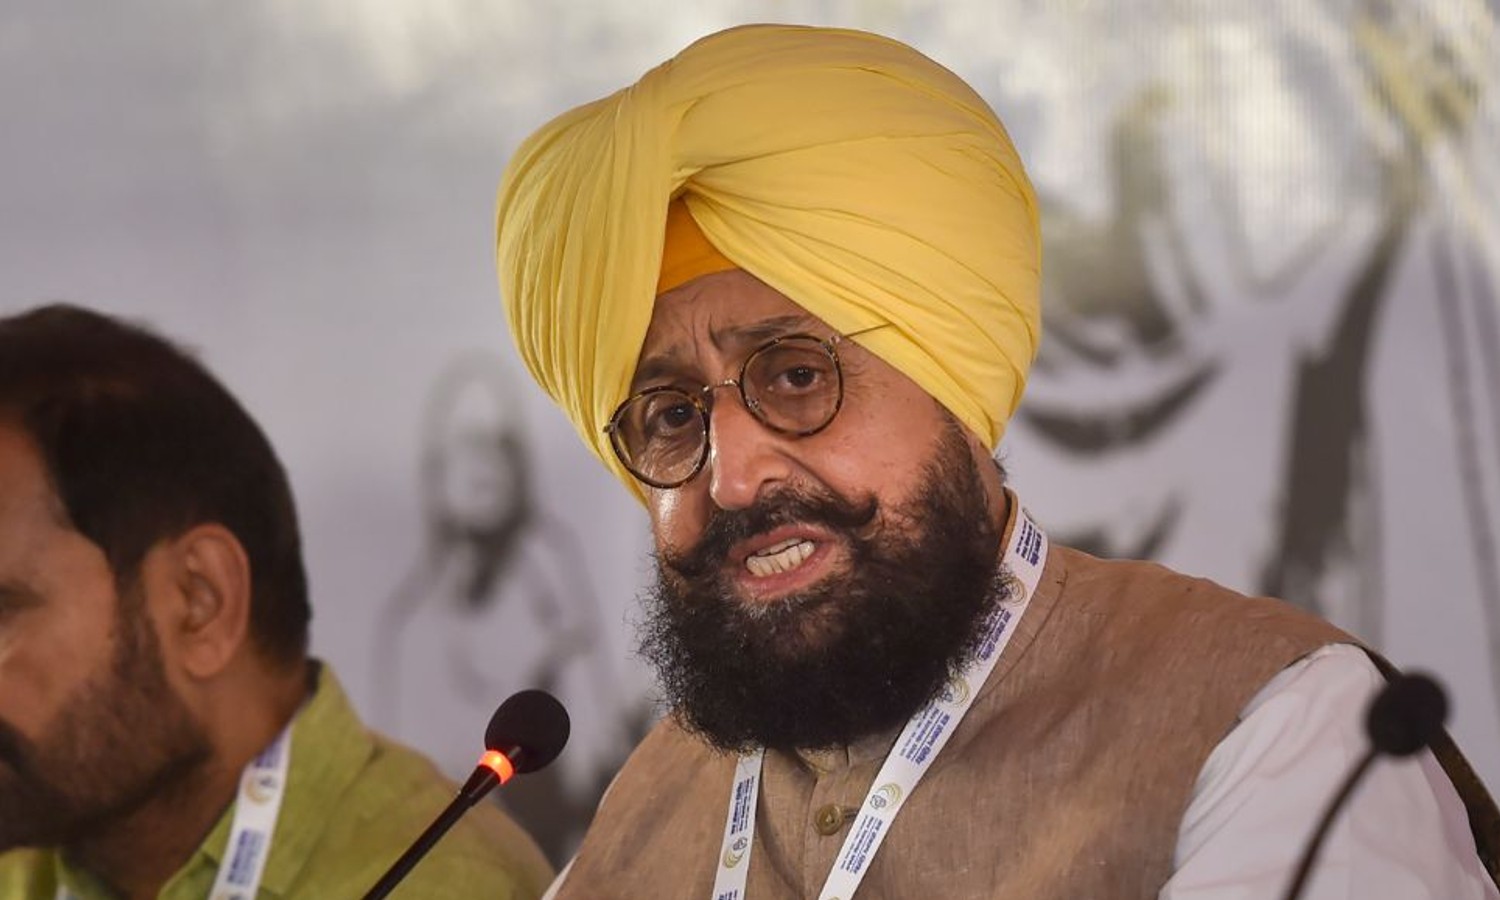 Mann government has not yet provided farmers with compensation: Bajwa